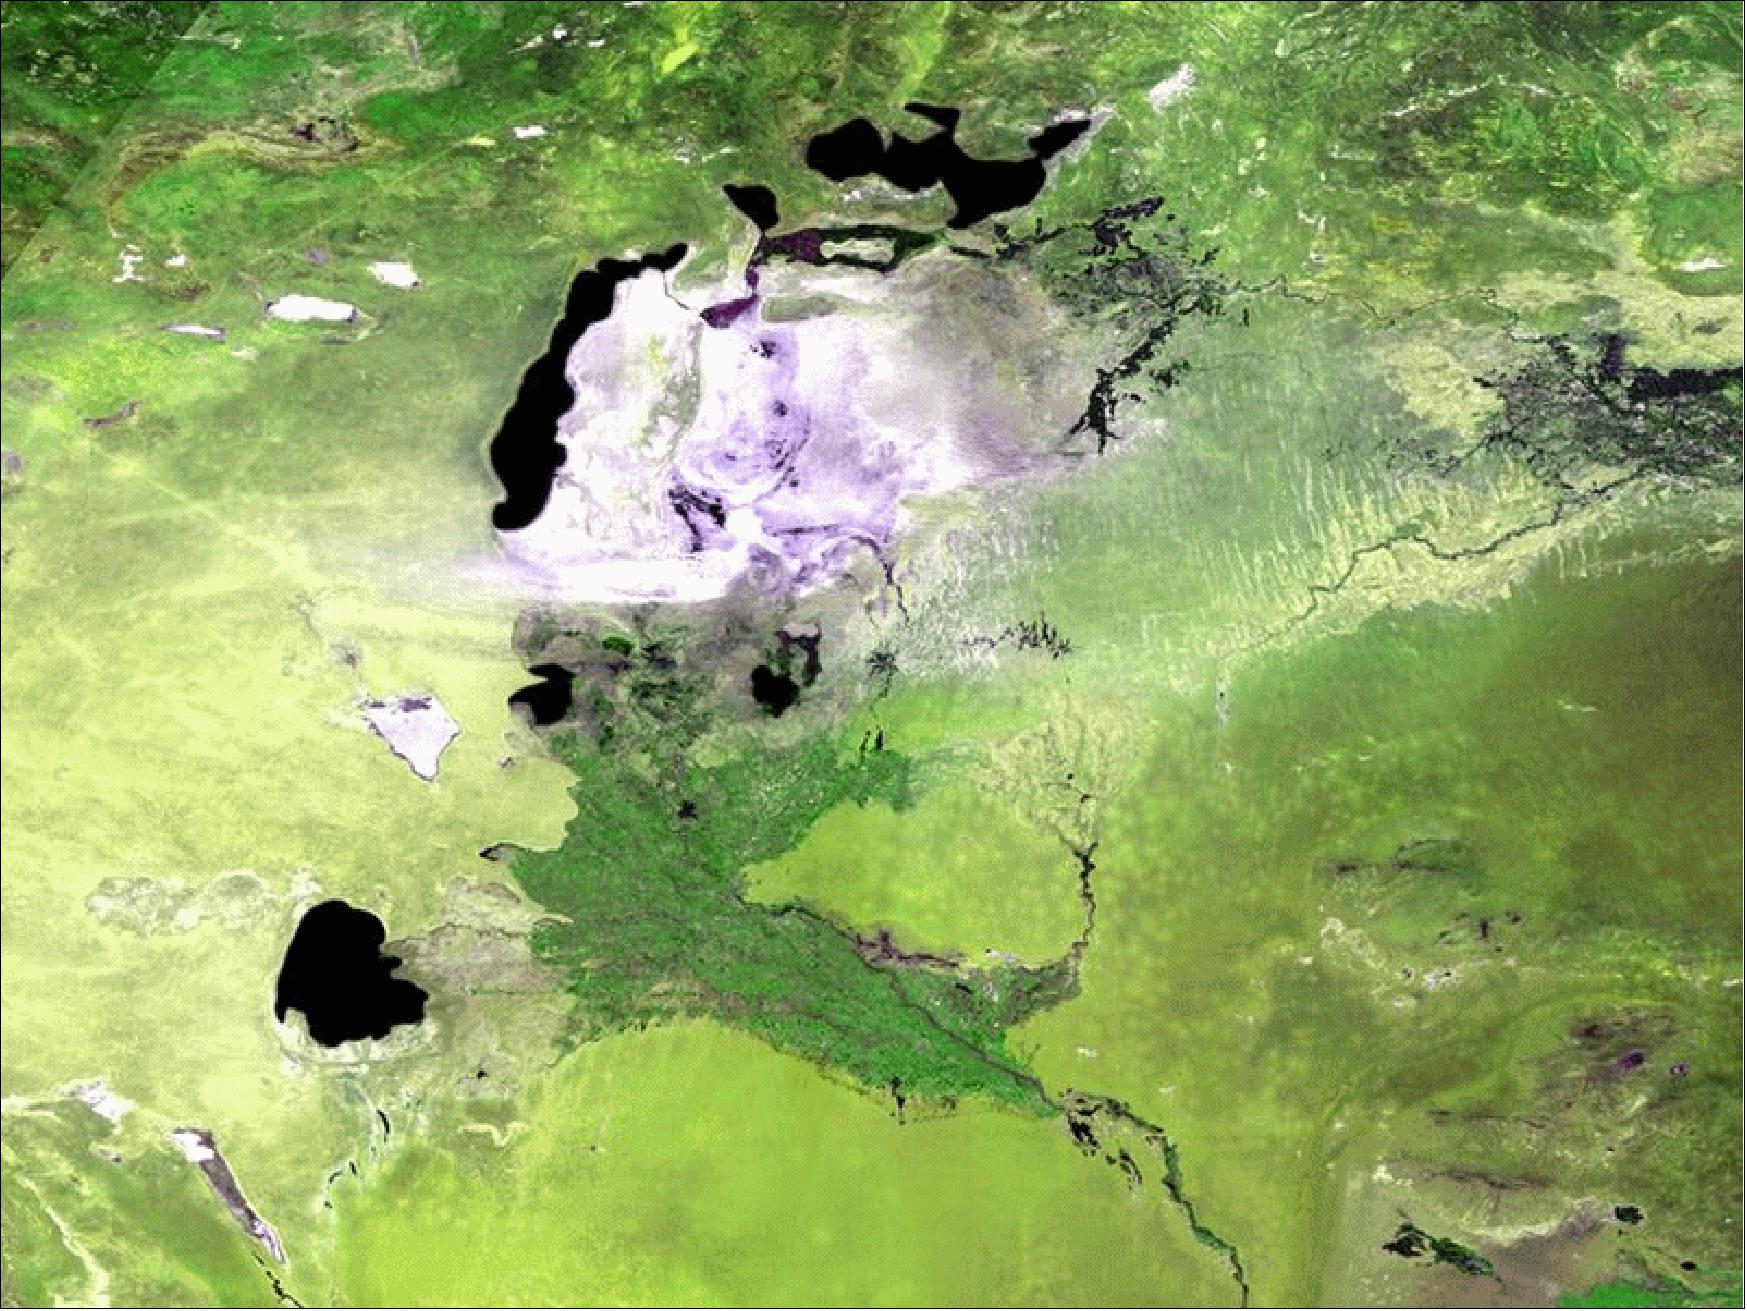 Figure 57: Central Asia's receding Aral Sea, acquired by ESA's PROBA-V minisatellite on May 13, 2013 at a resolution of 300 m (image credit: ESA, VITO) 81)